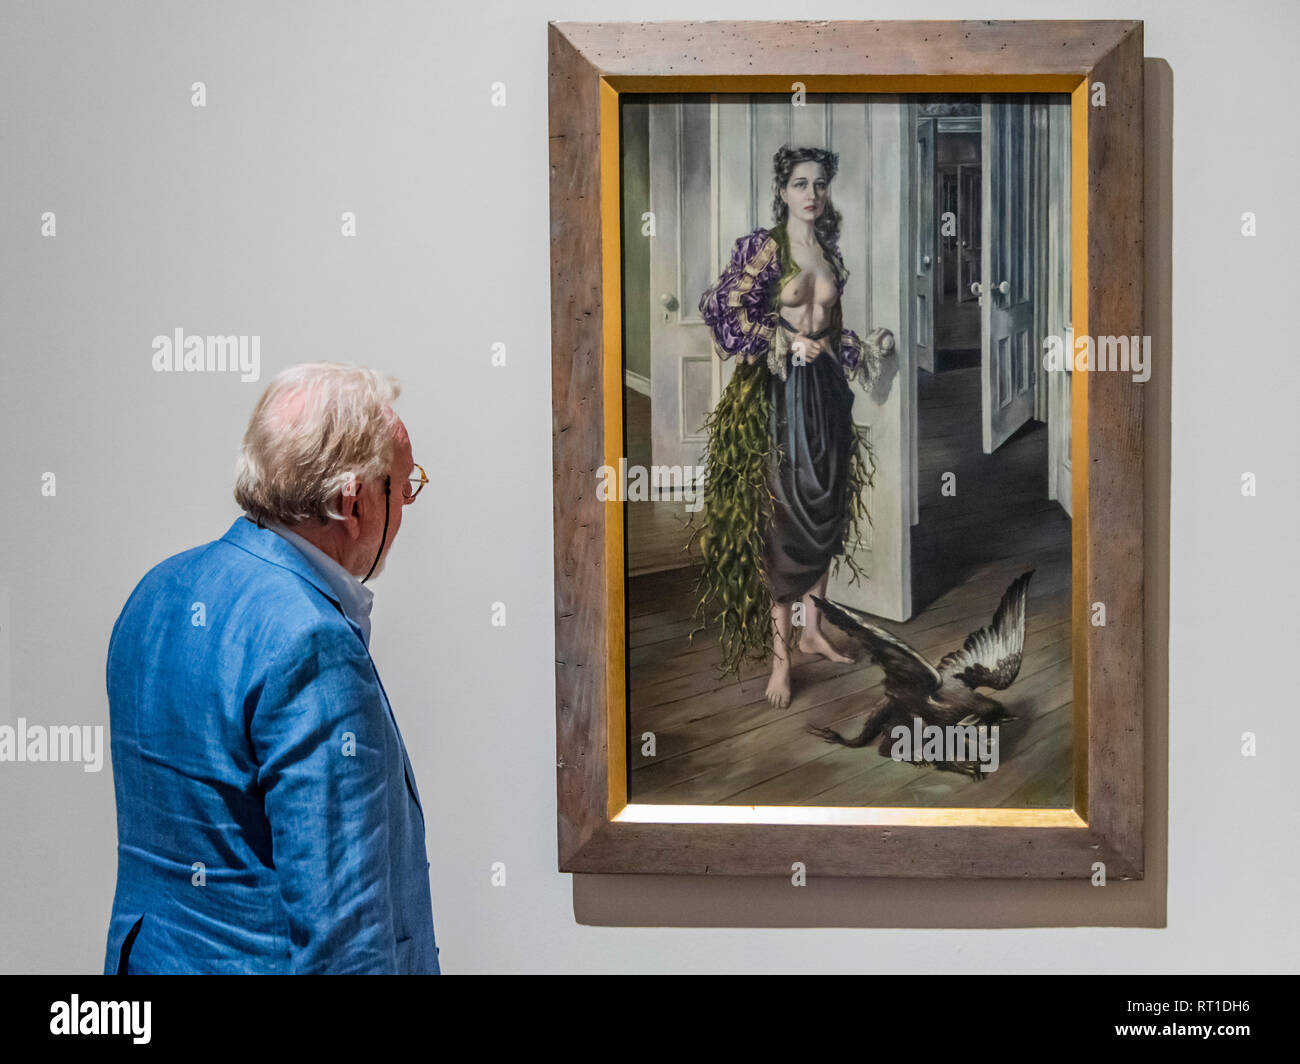 London, UK. 27th Feb, 2019. Birthday, 1942 - The first day of the new Tate Modern exhibition of the work of Dorothea Tanning. The first large-scale exhibition of the artist’s work for 25 years and the first ever to span her seven-decade career. Bringing together some 100 works from across the globe, a third of which have never been shown in the UK; the exhibition explores how she expanded the language of surrealism. From her early enigmatic paintings, to her ballet designs, uncanny stuffed textile sculptures, installations and large-scale late works. Credit: Guy Bell/Alamy Live News Stock Photo